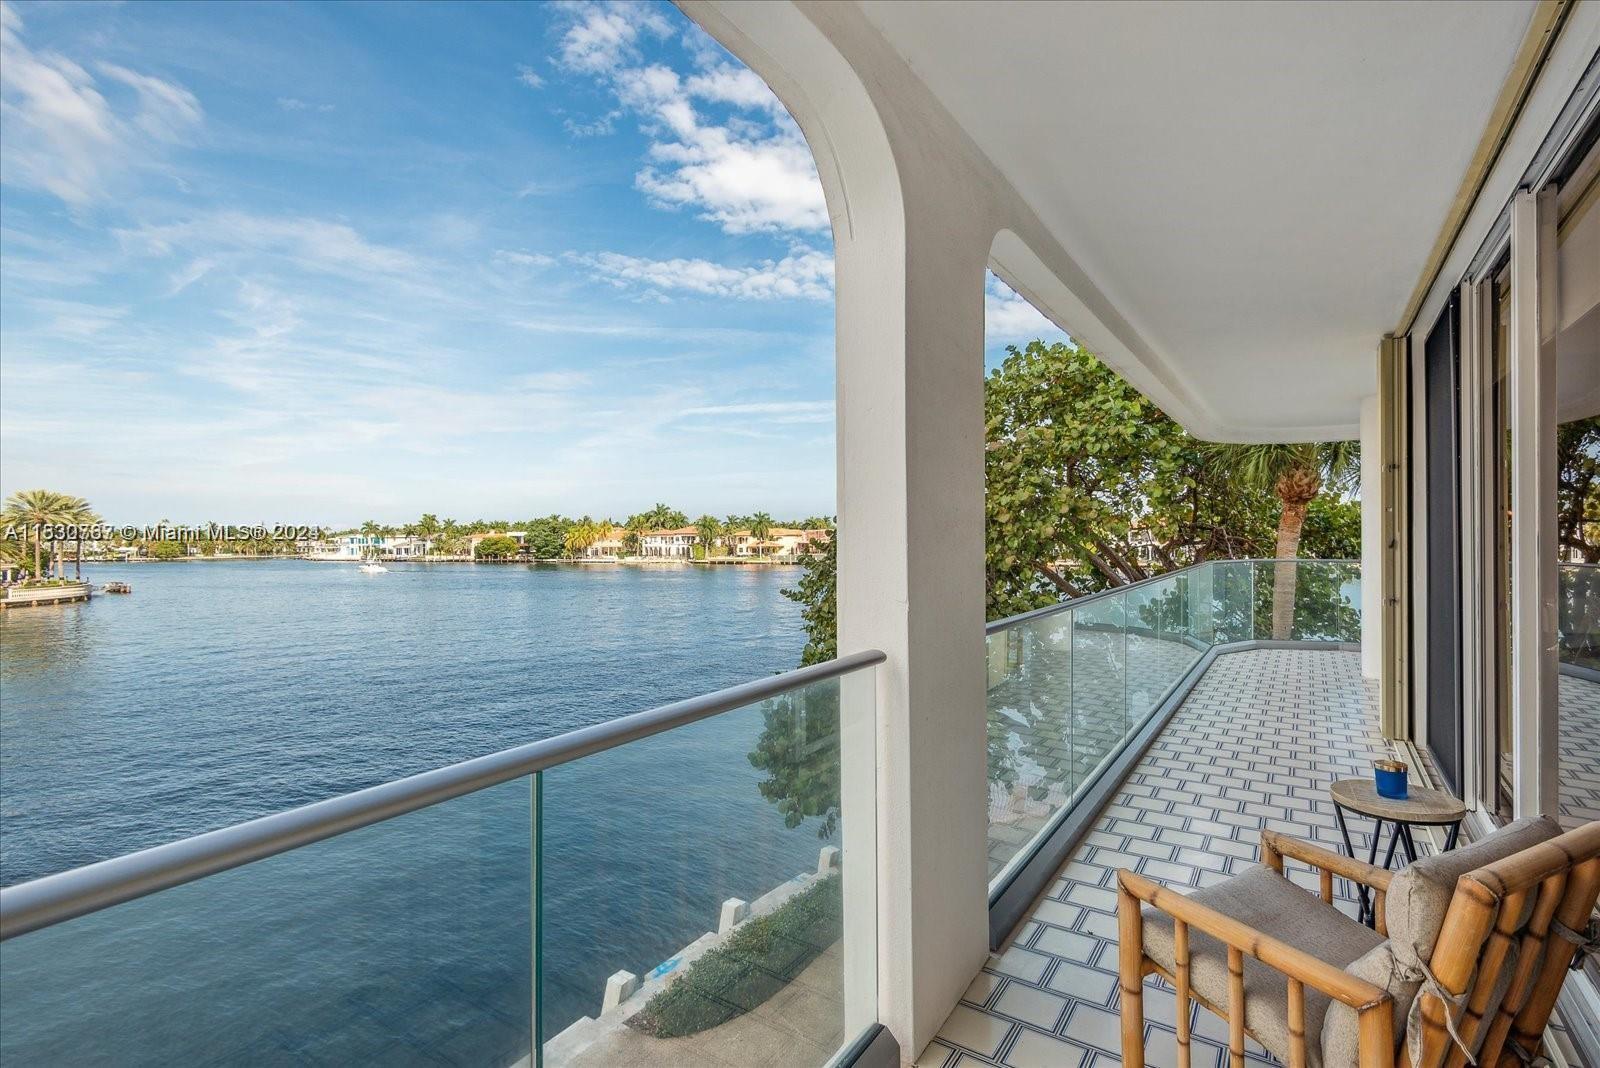 Exquisite & Spacious...WATERFRONT TOWNHOME - Directly on the Intracoastal Waterway...2 Bedrooms + De